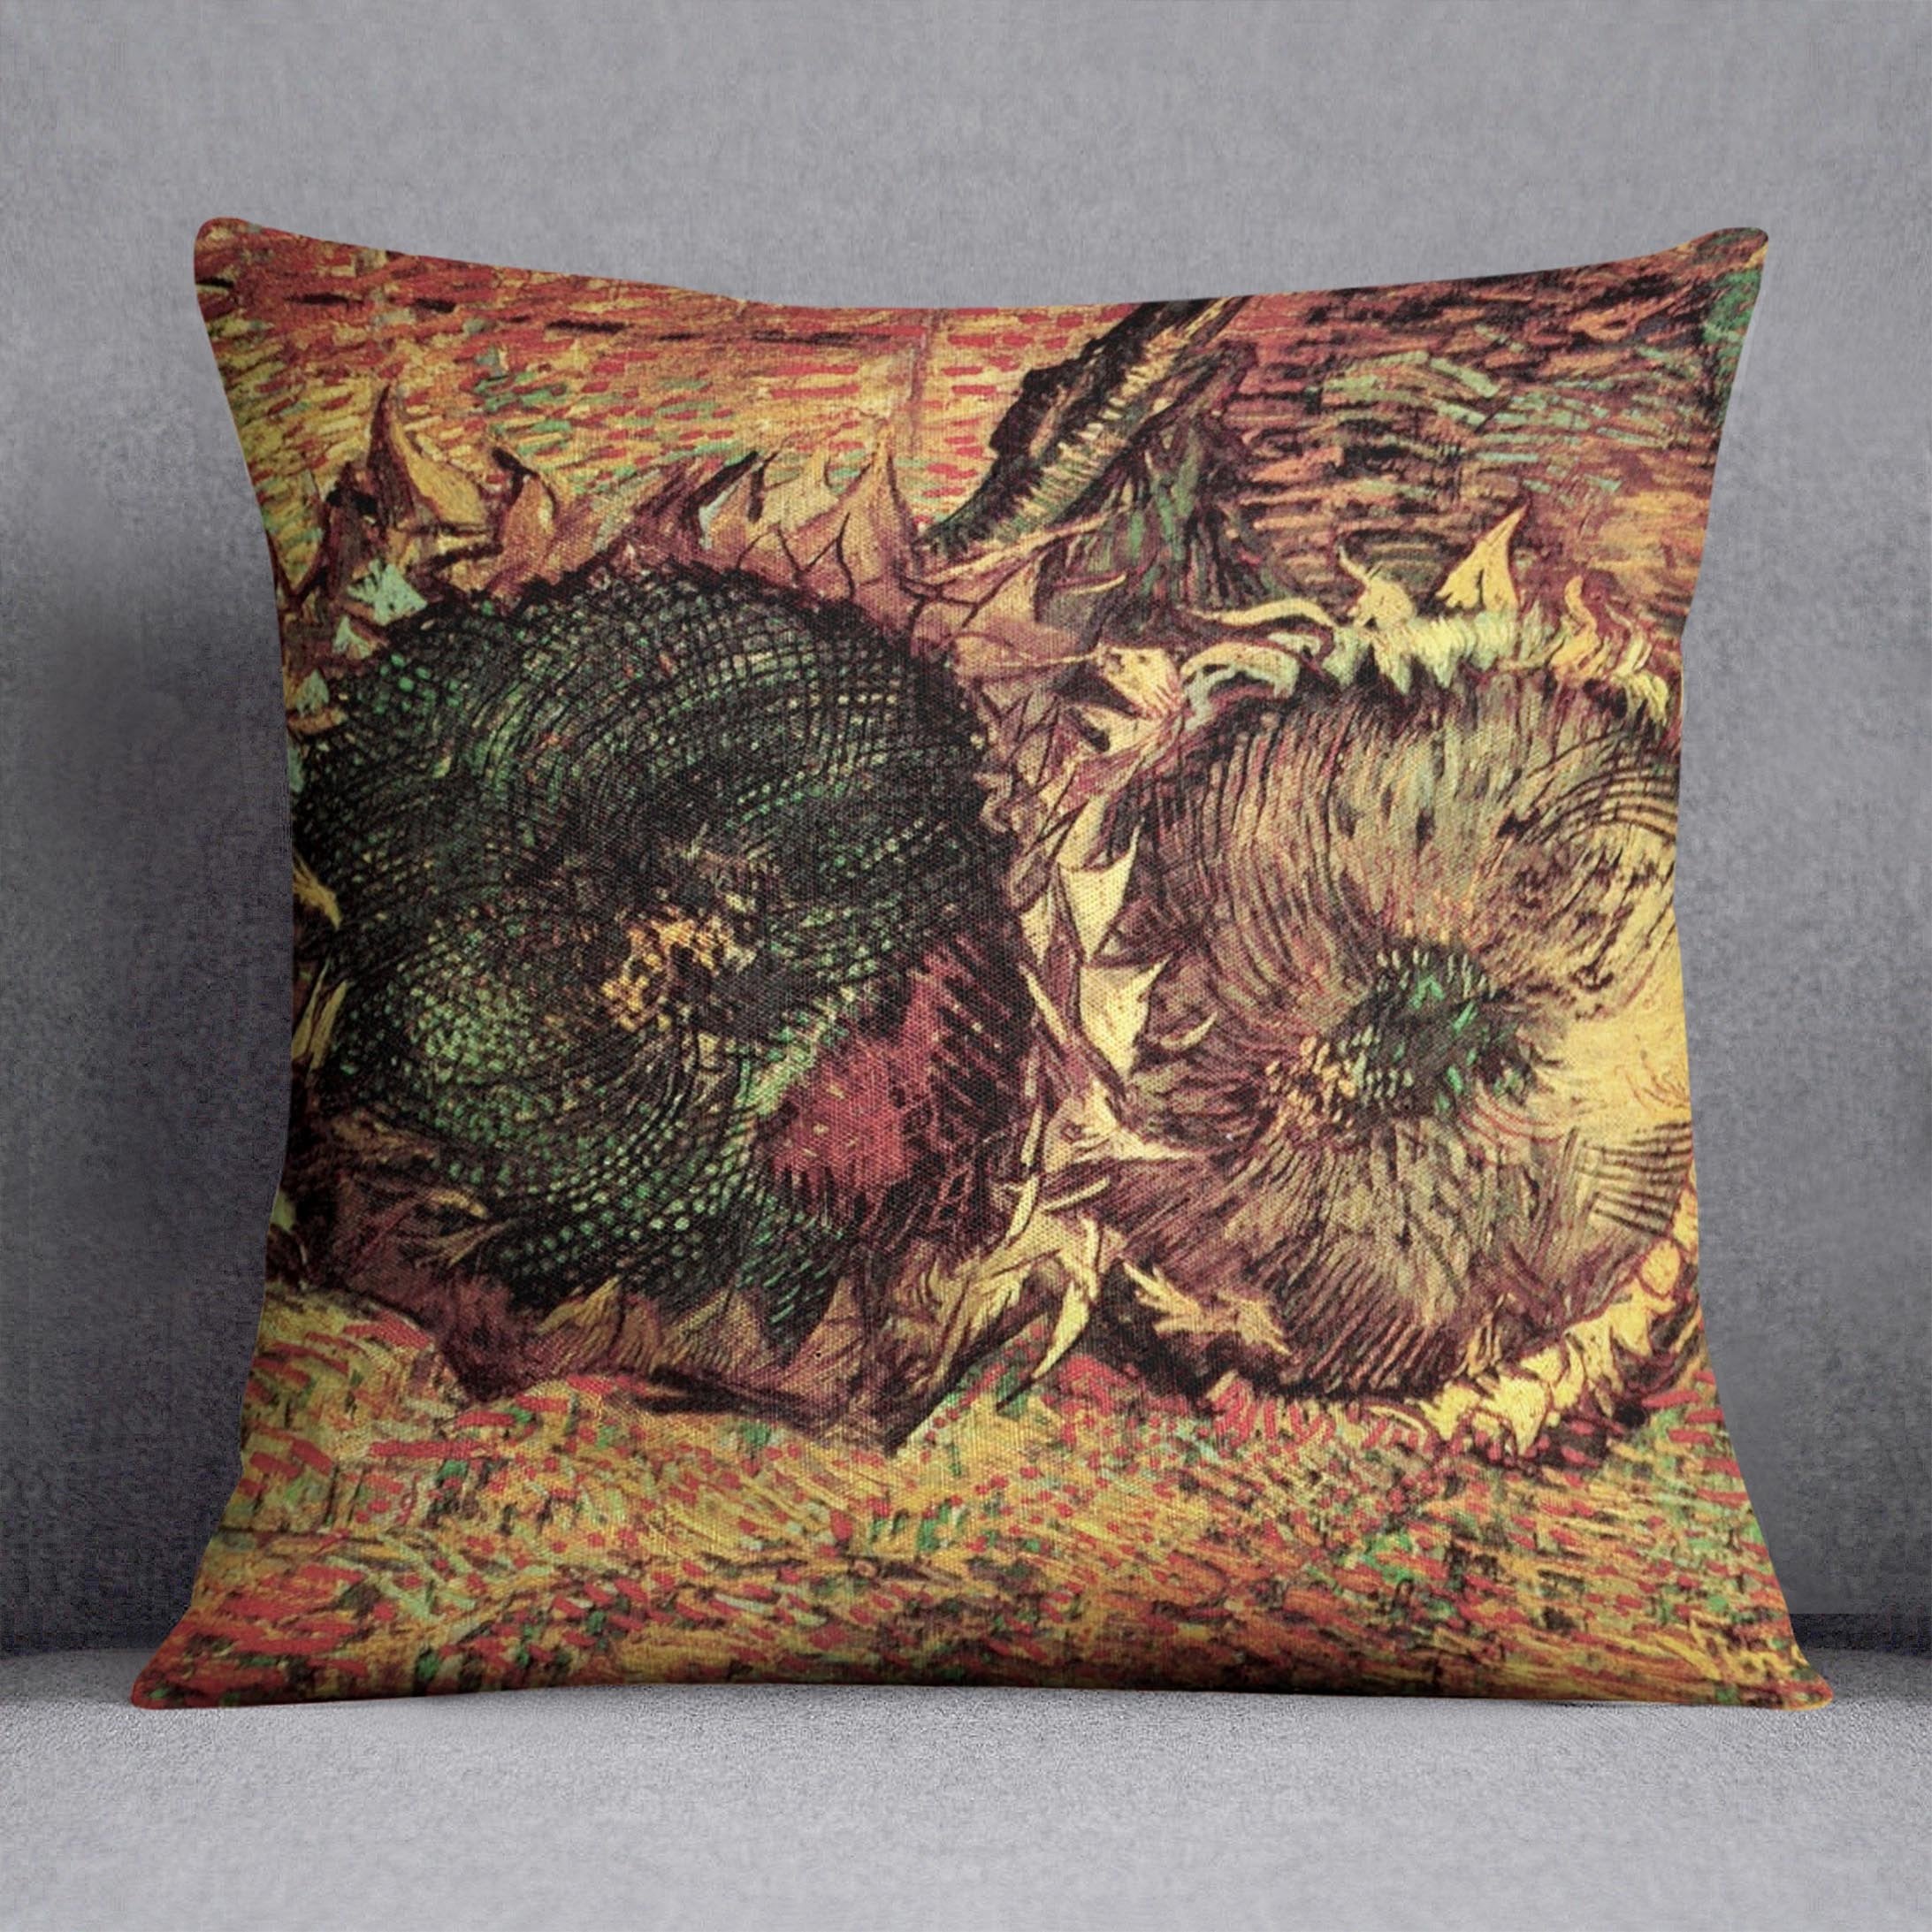 Two Cut Sunflowers 2 by Van Gogh Throw Pillow